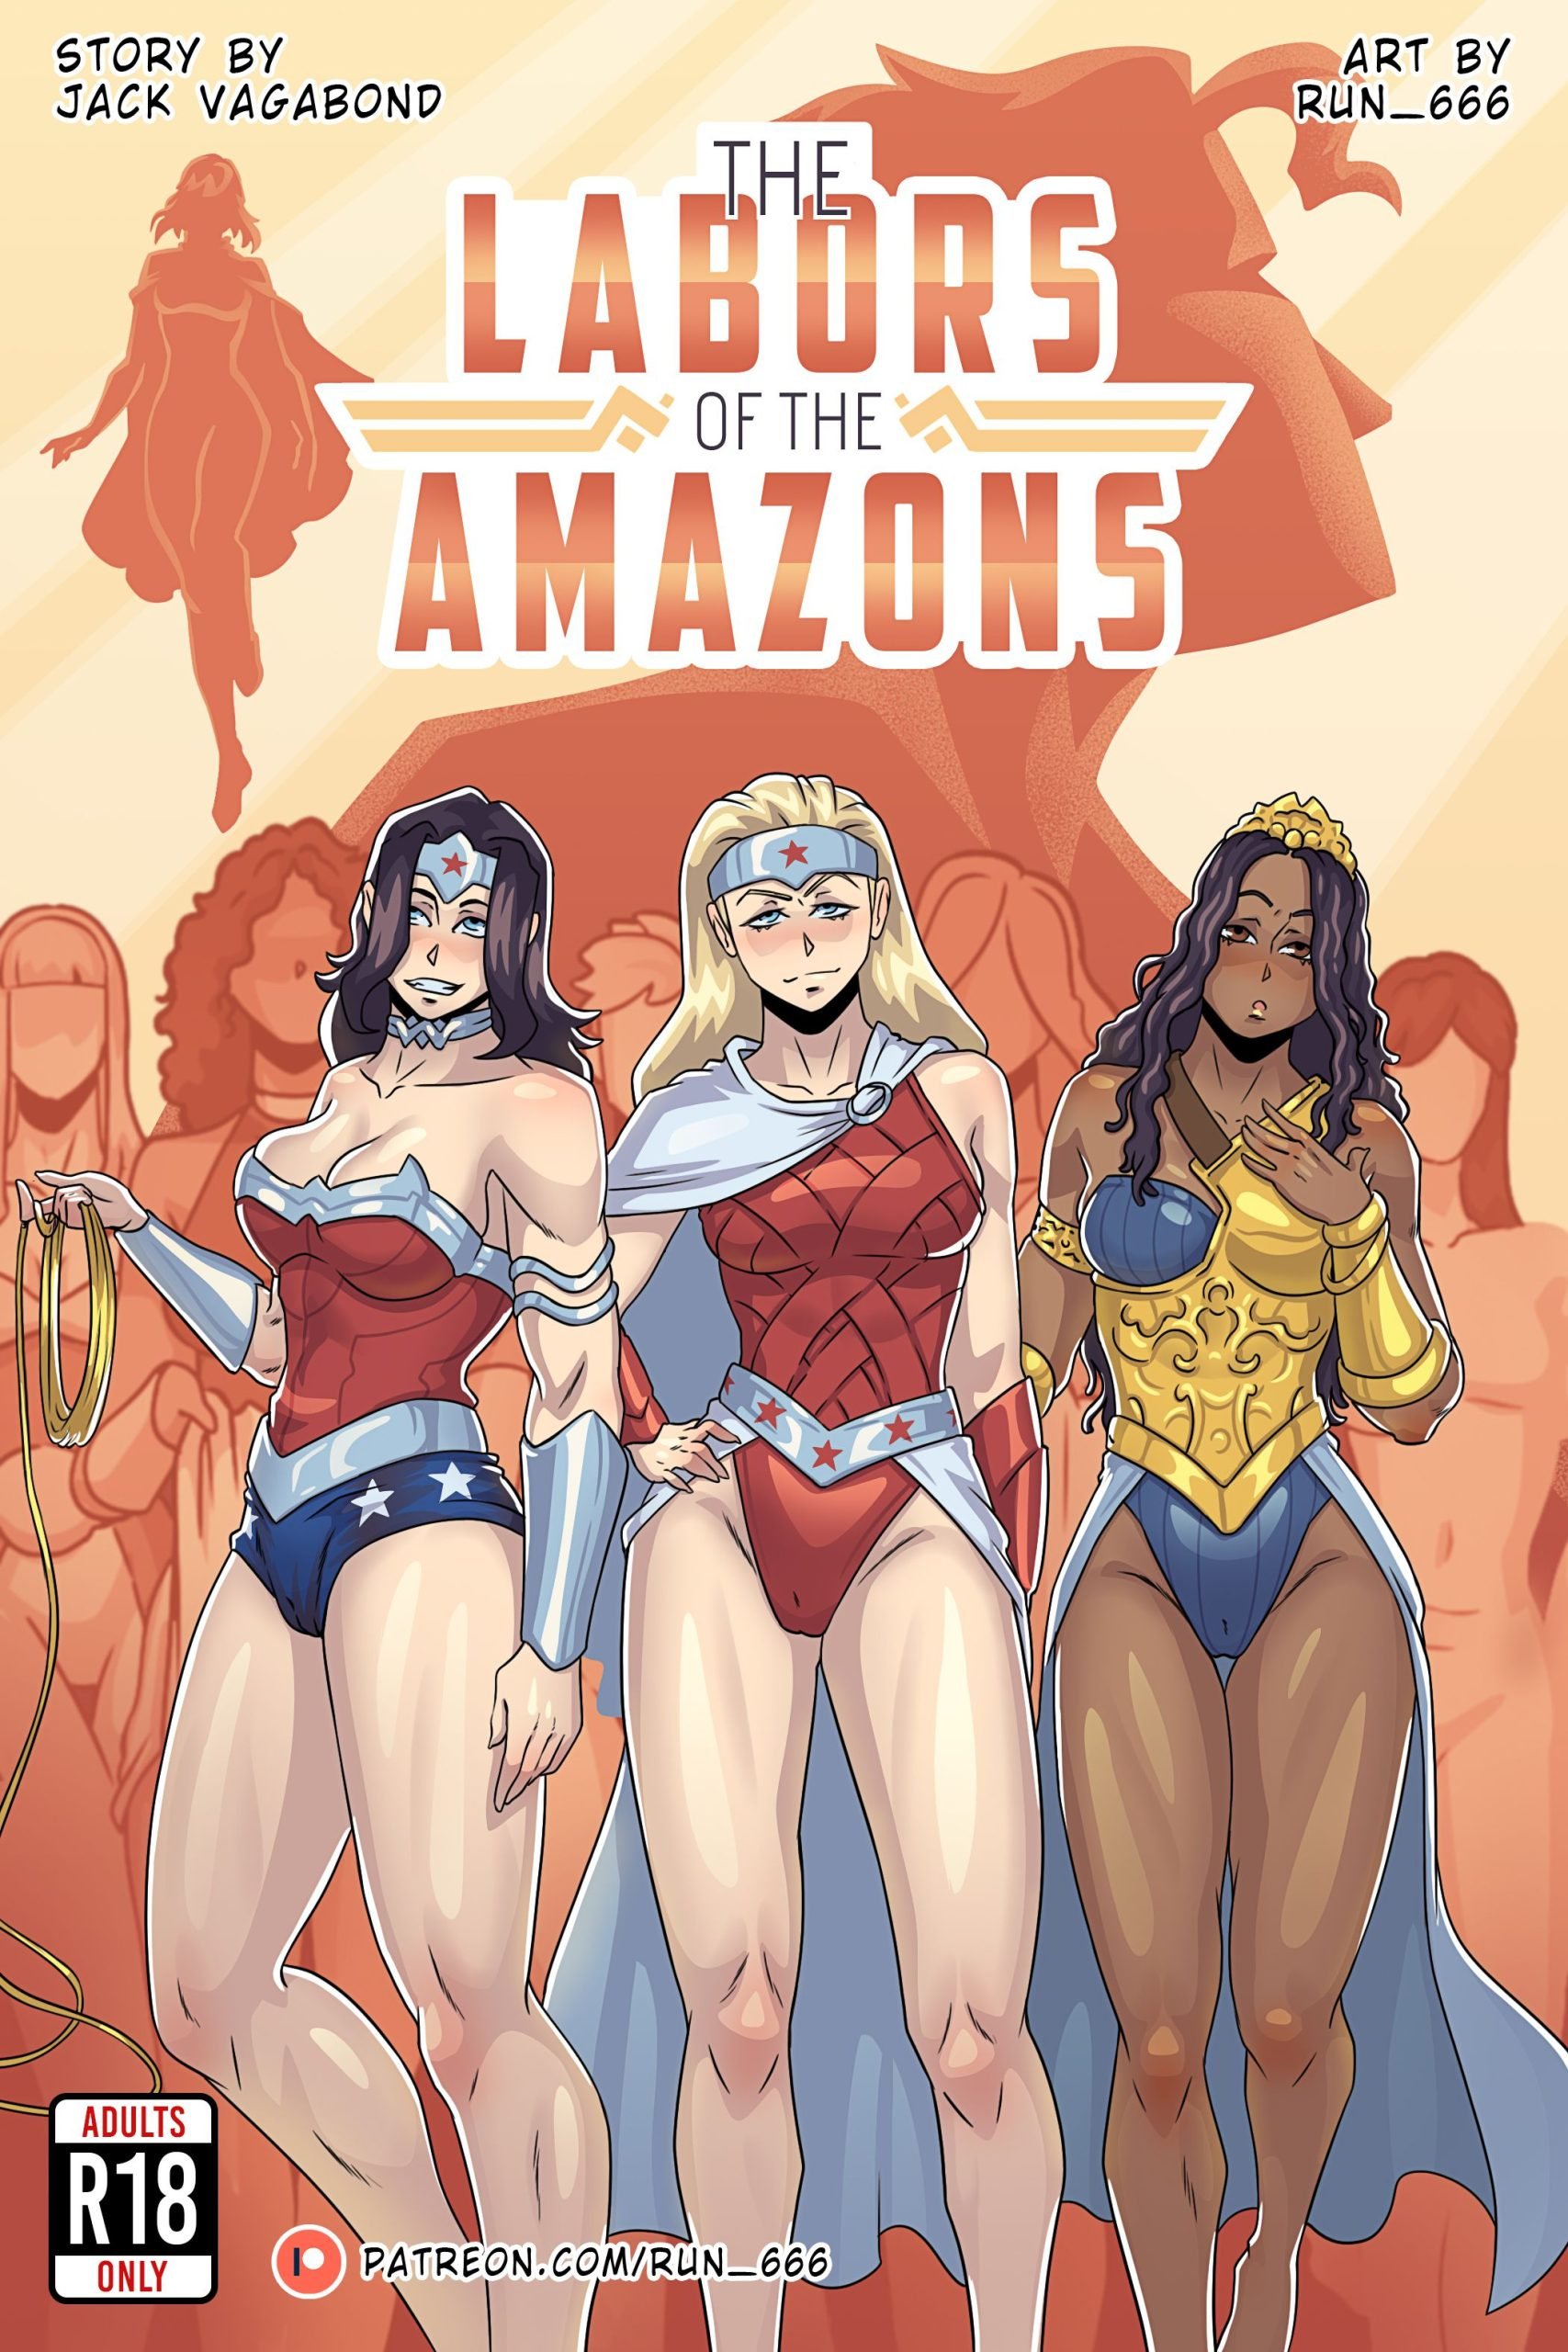 The Labors of the Amazons (Wonder Woman) Run 666 Porn Comic